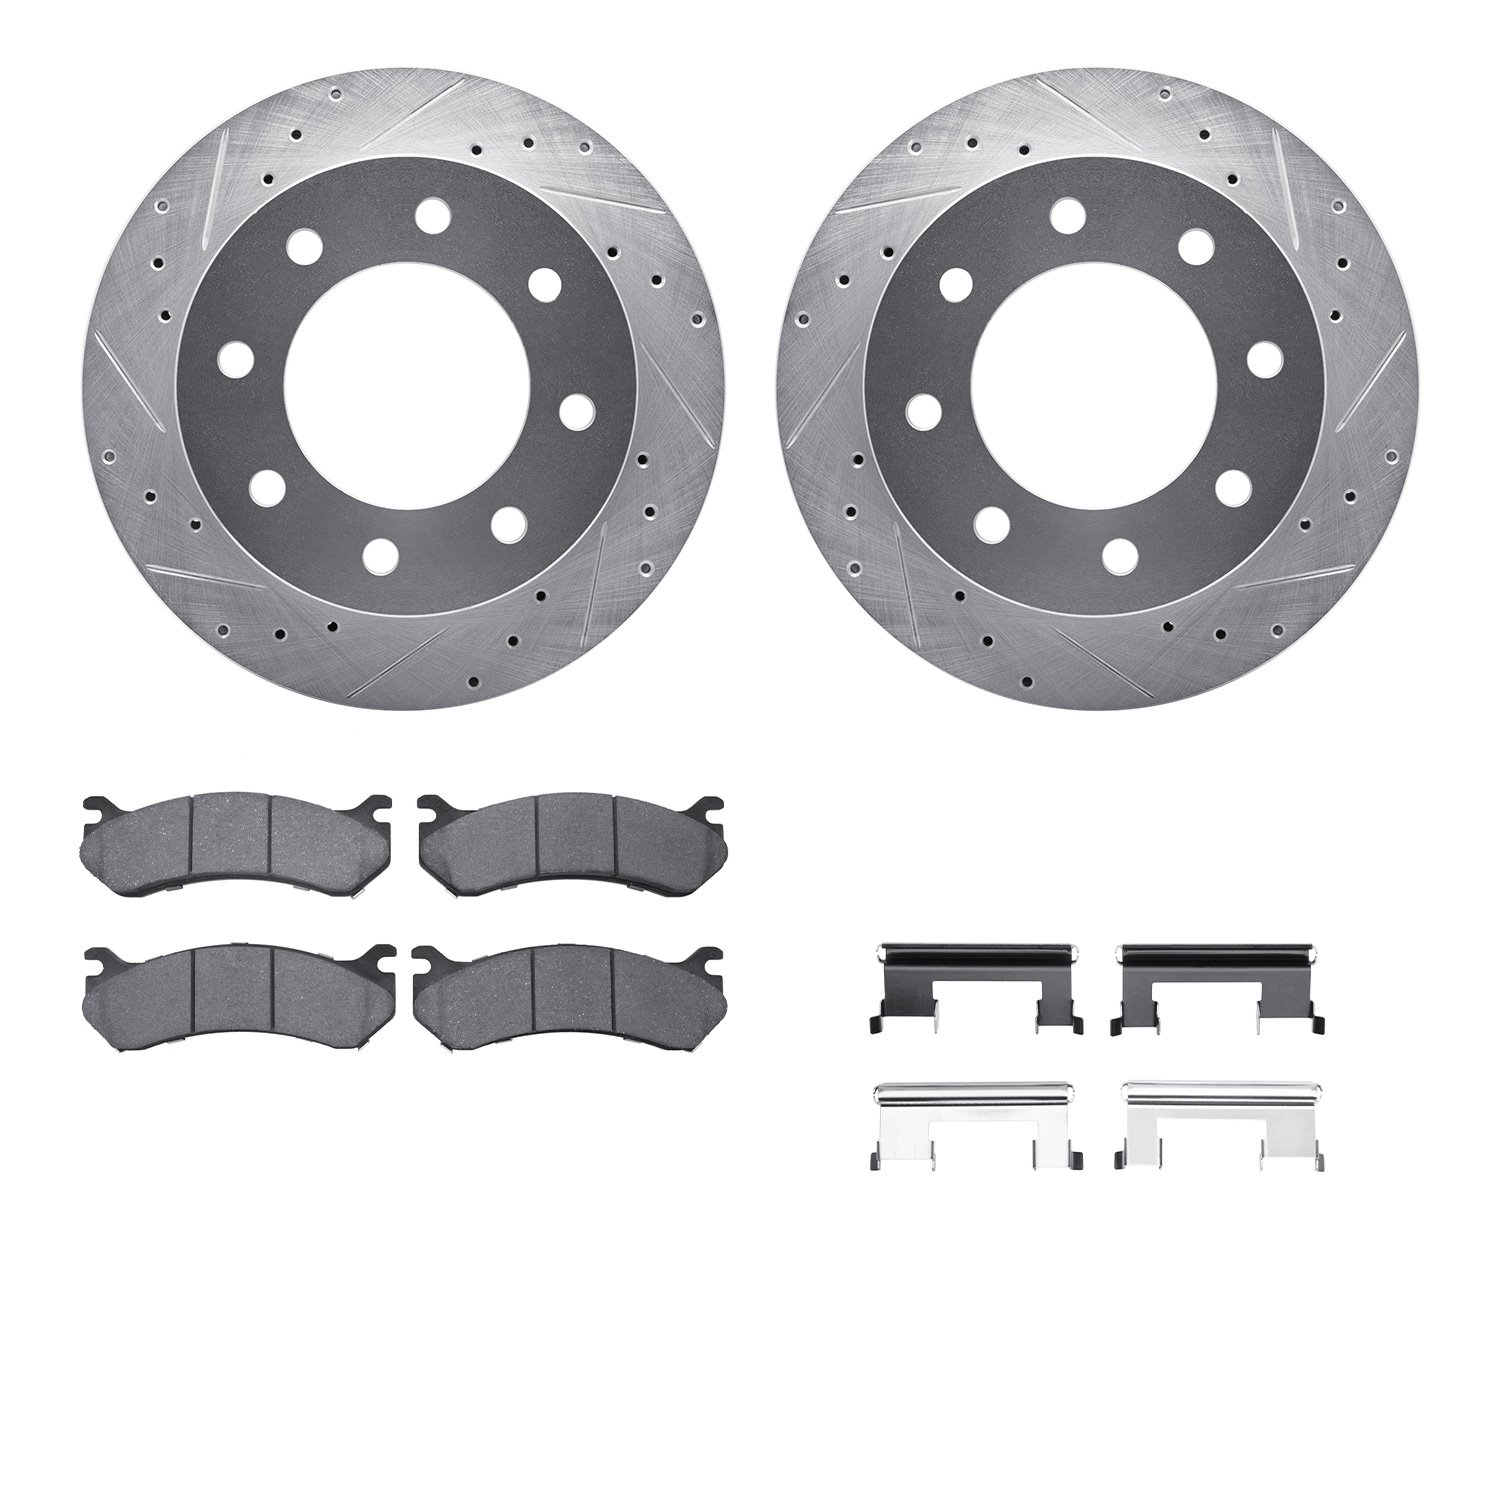 7412-48032 Drilled/Slotted Brake Rotors with Ultimate-Duty Brake Pads Kit & Hardware [Silver], 2003-2005 GM, Position: Rear